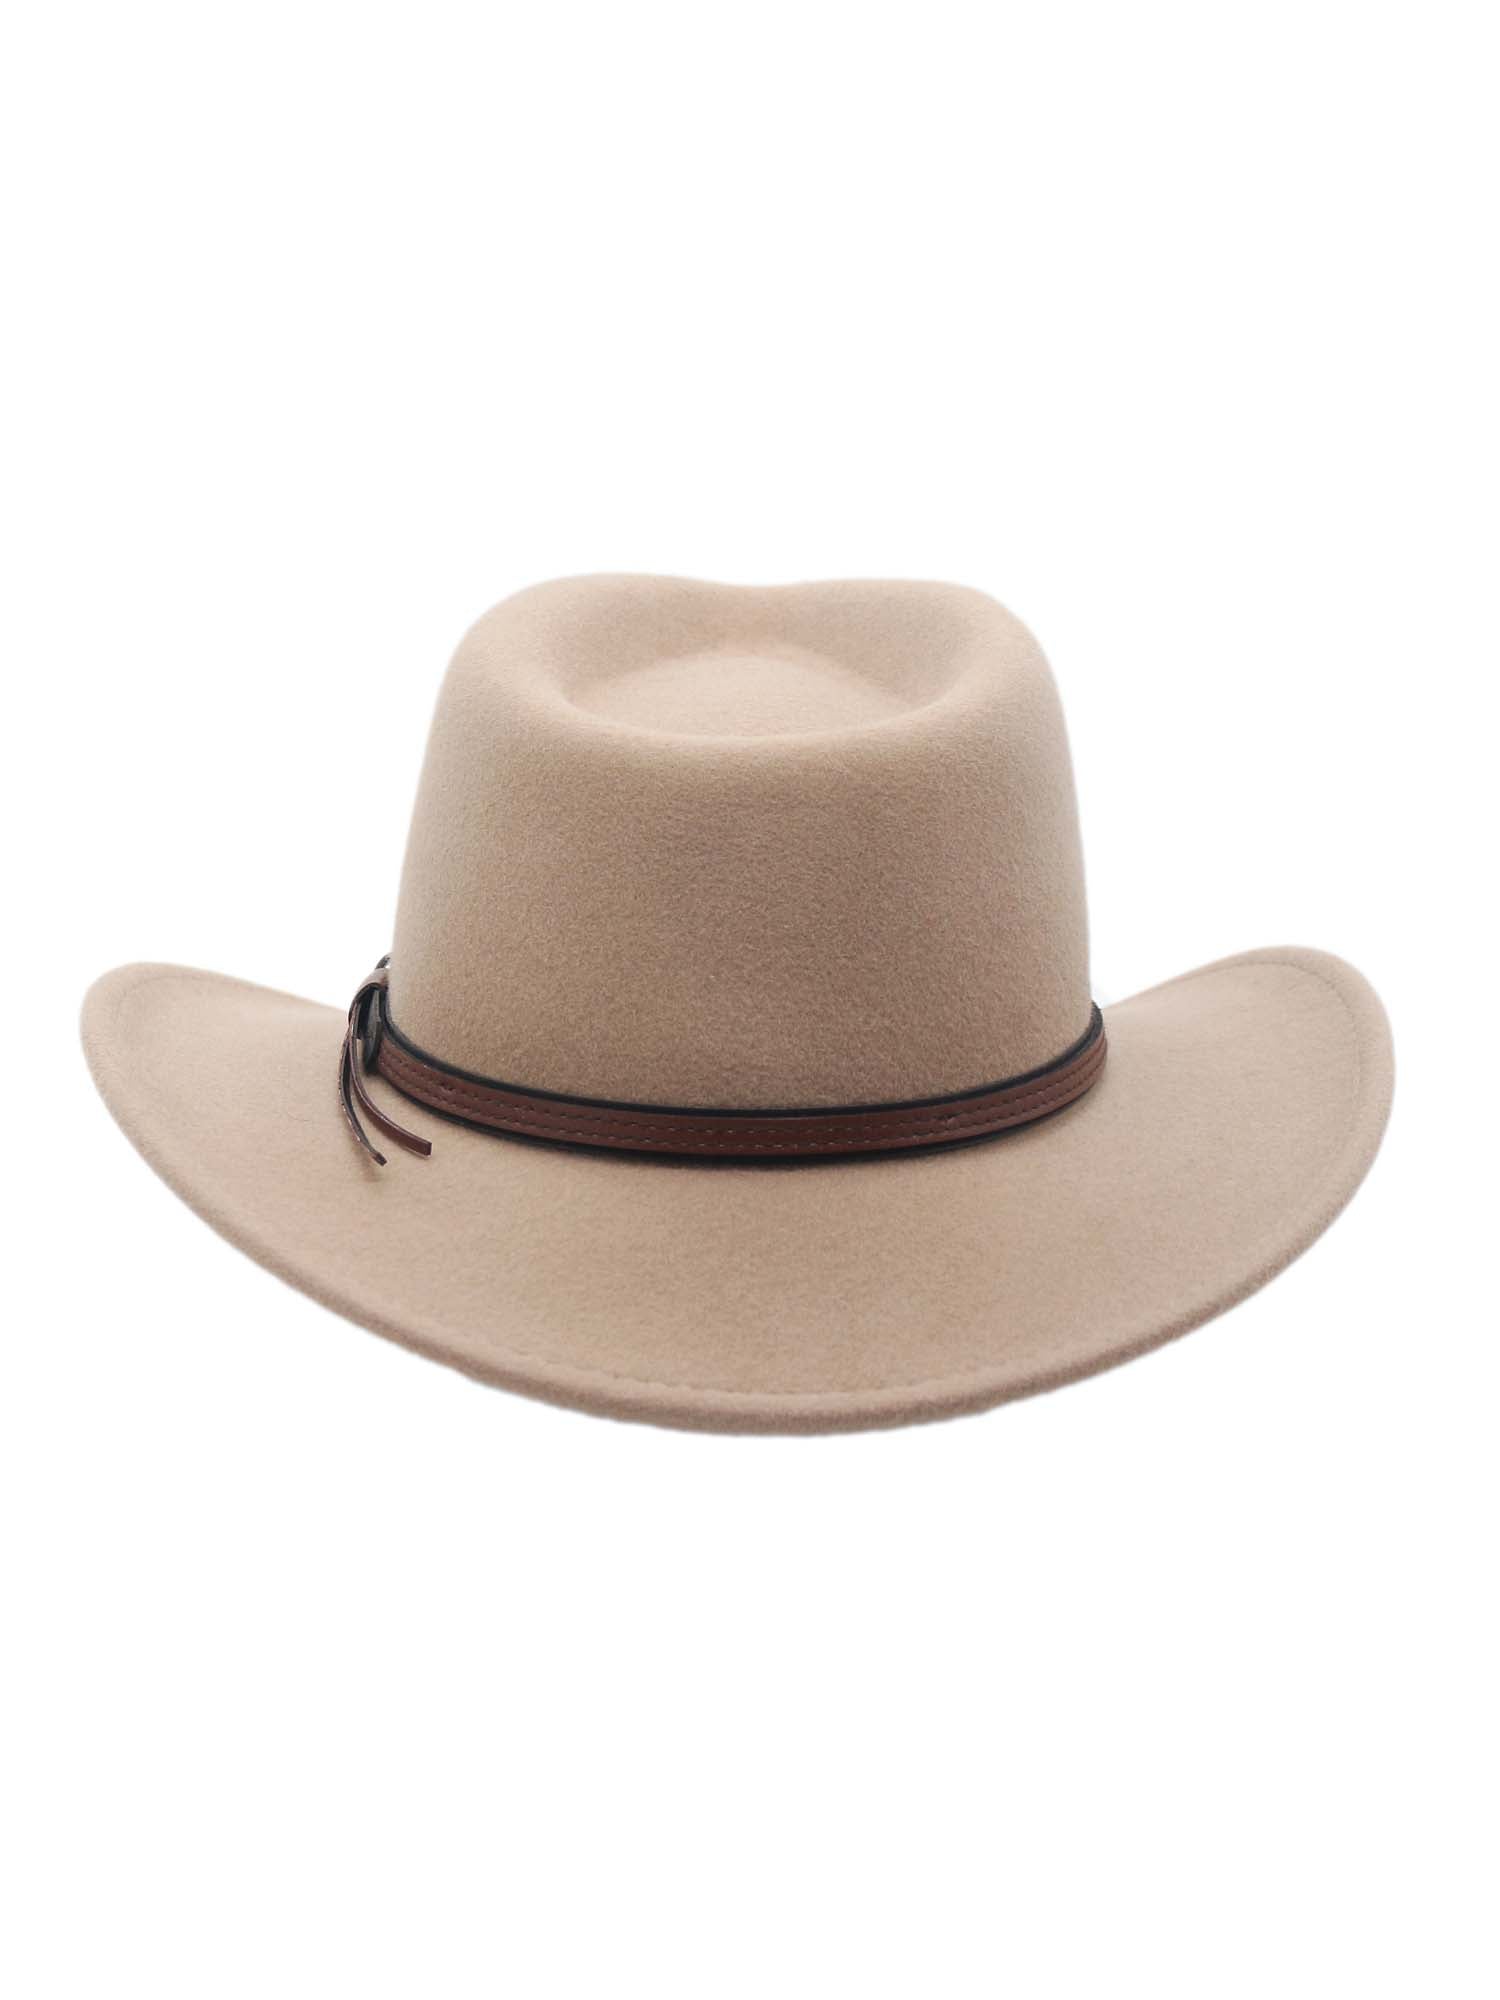 Denver Crushable Wool Felt Outback Western Style Cowboy Hat by Silver Canyon